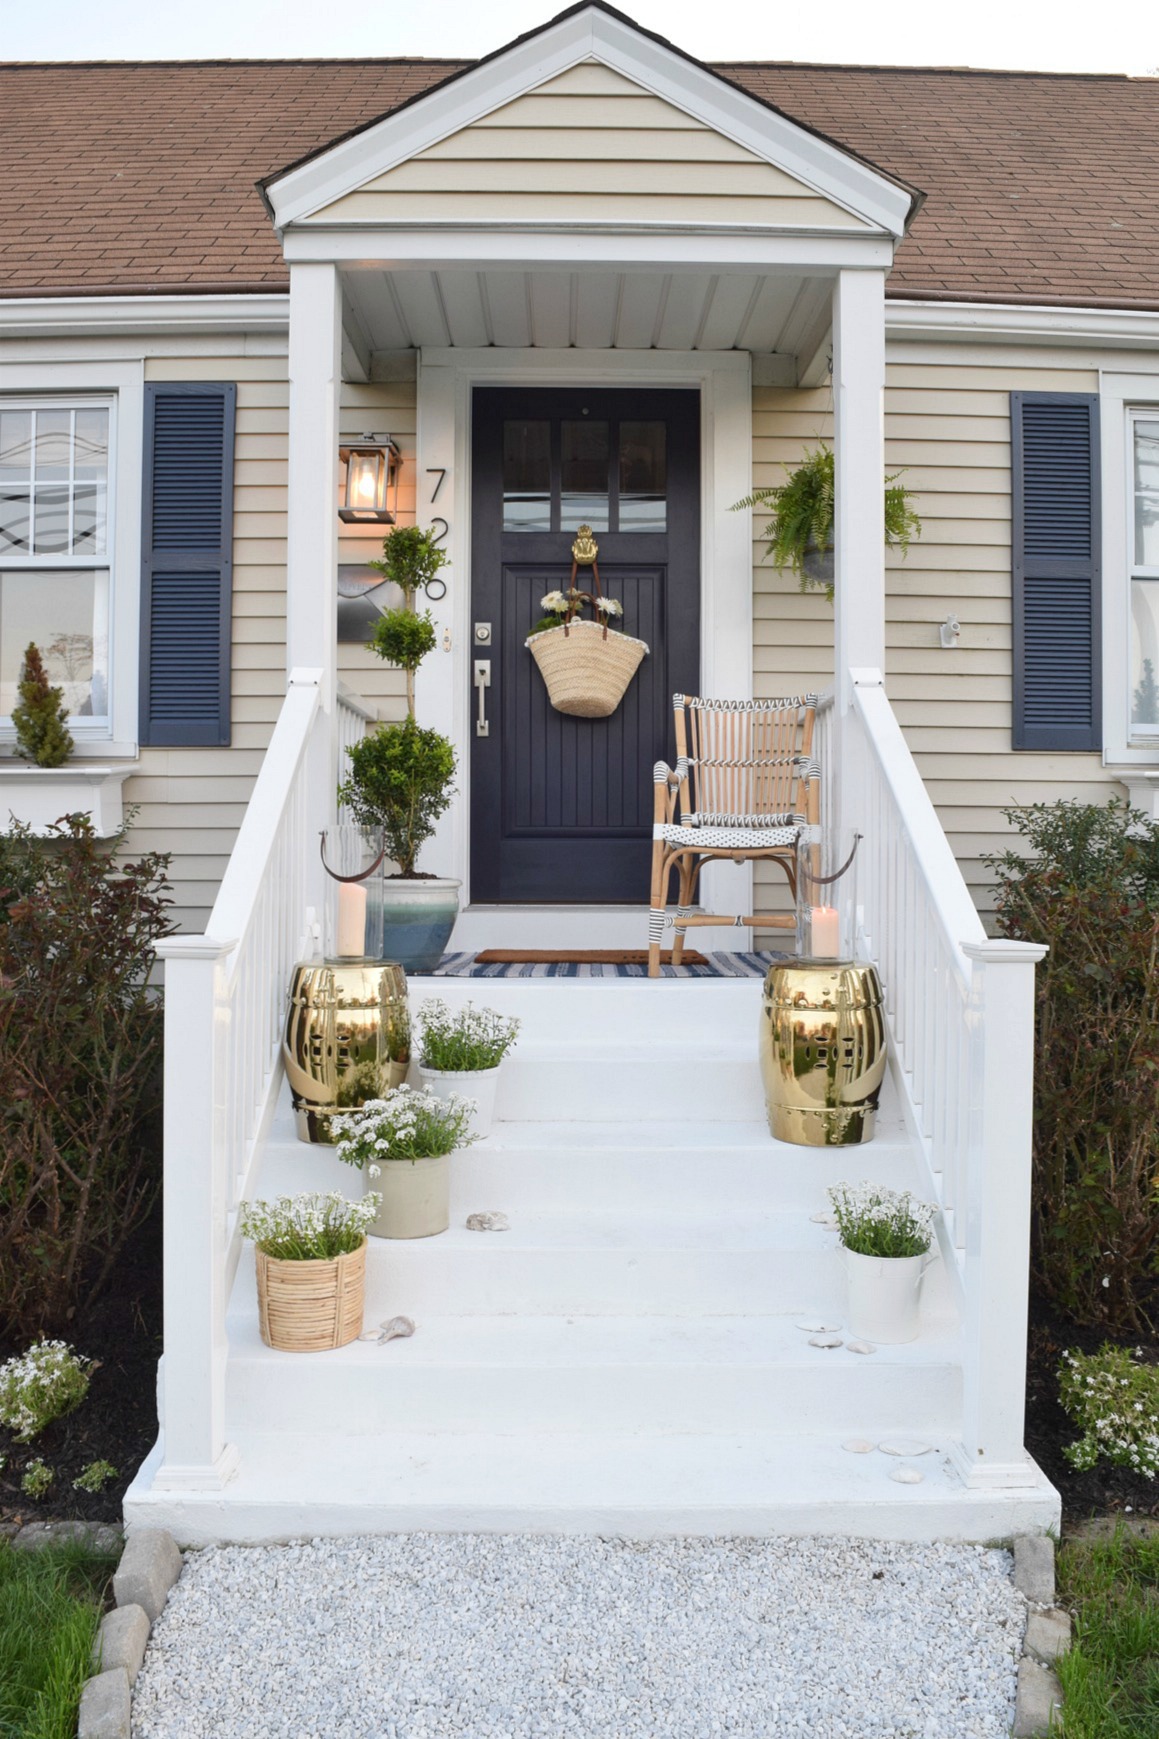 Covered Front Porch Ideas